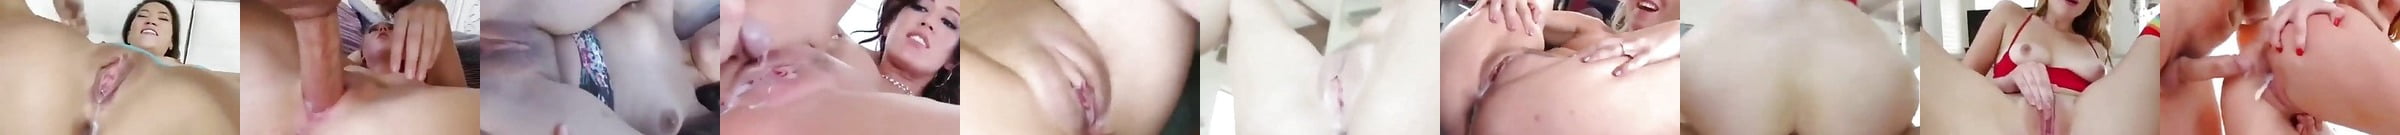 These Naked Tiktoks Got My Account Banned Free Hd Porn 5b Xhamster